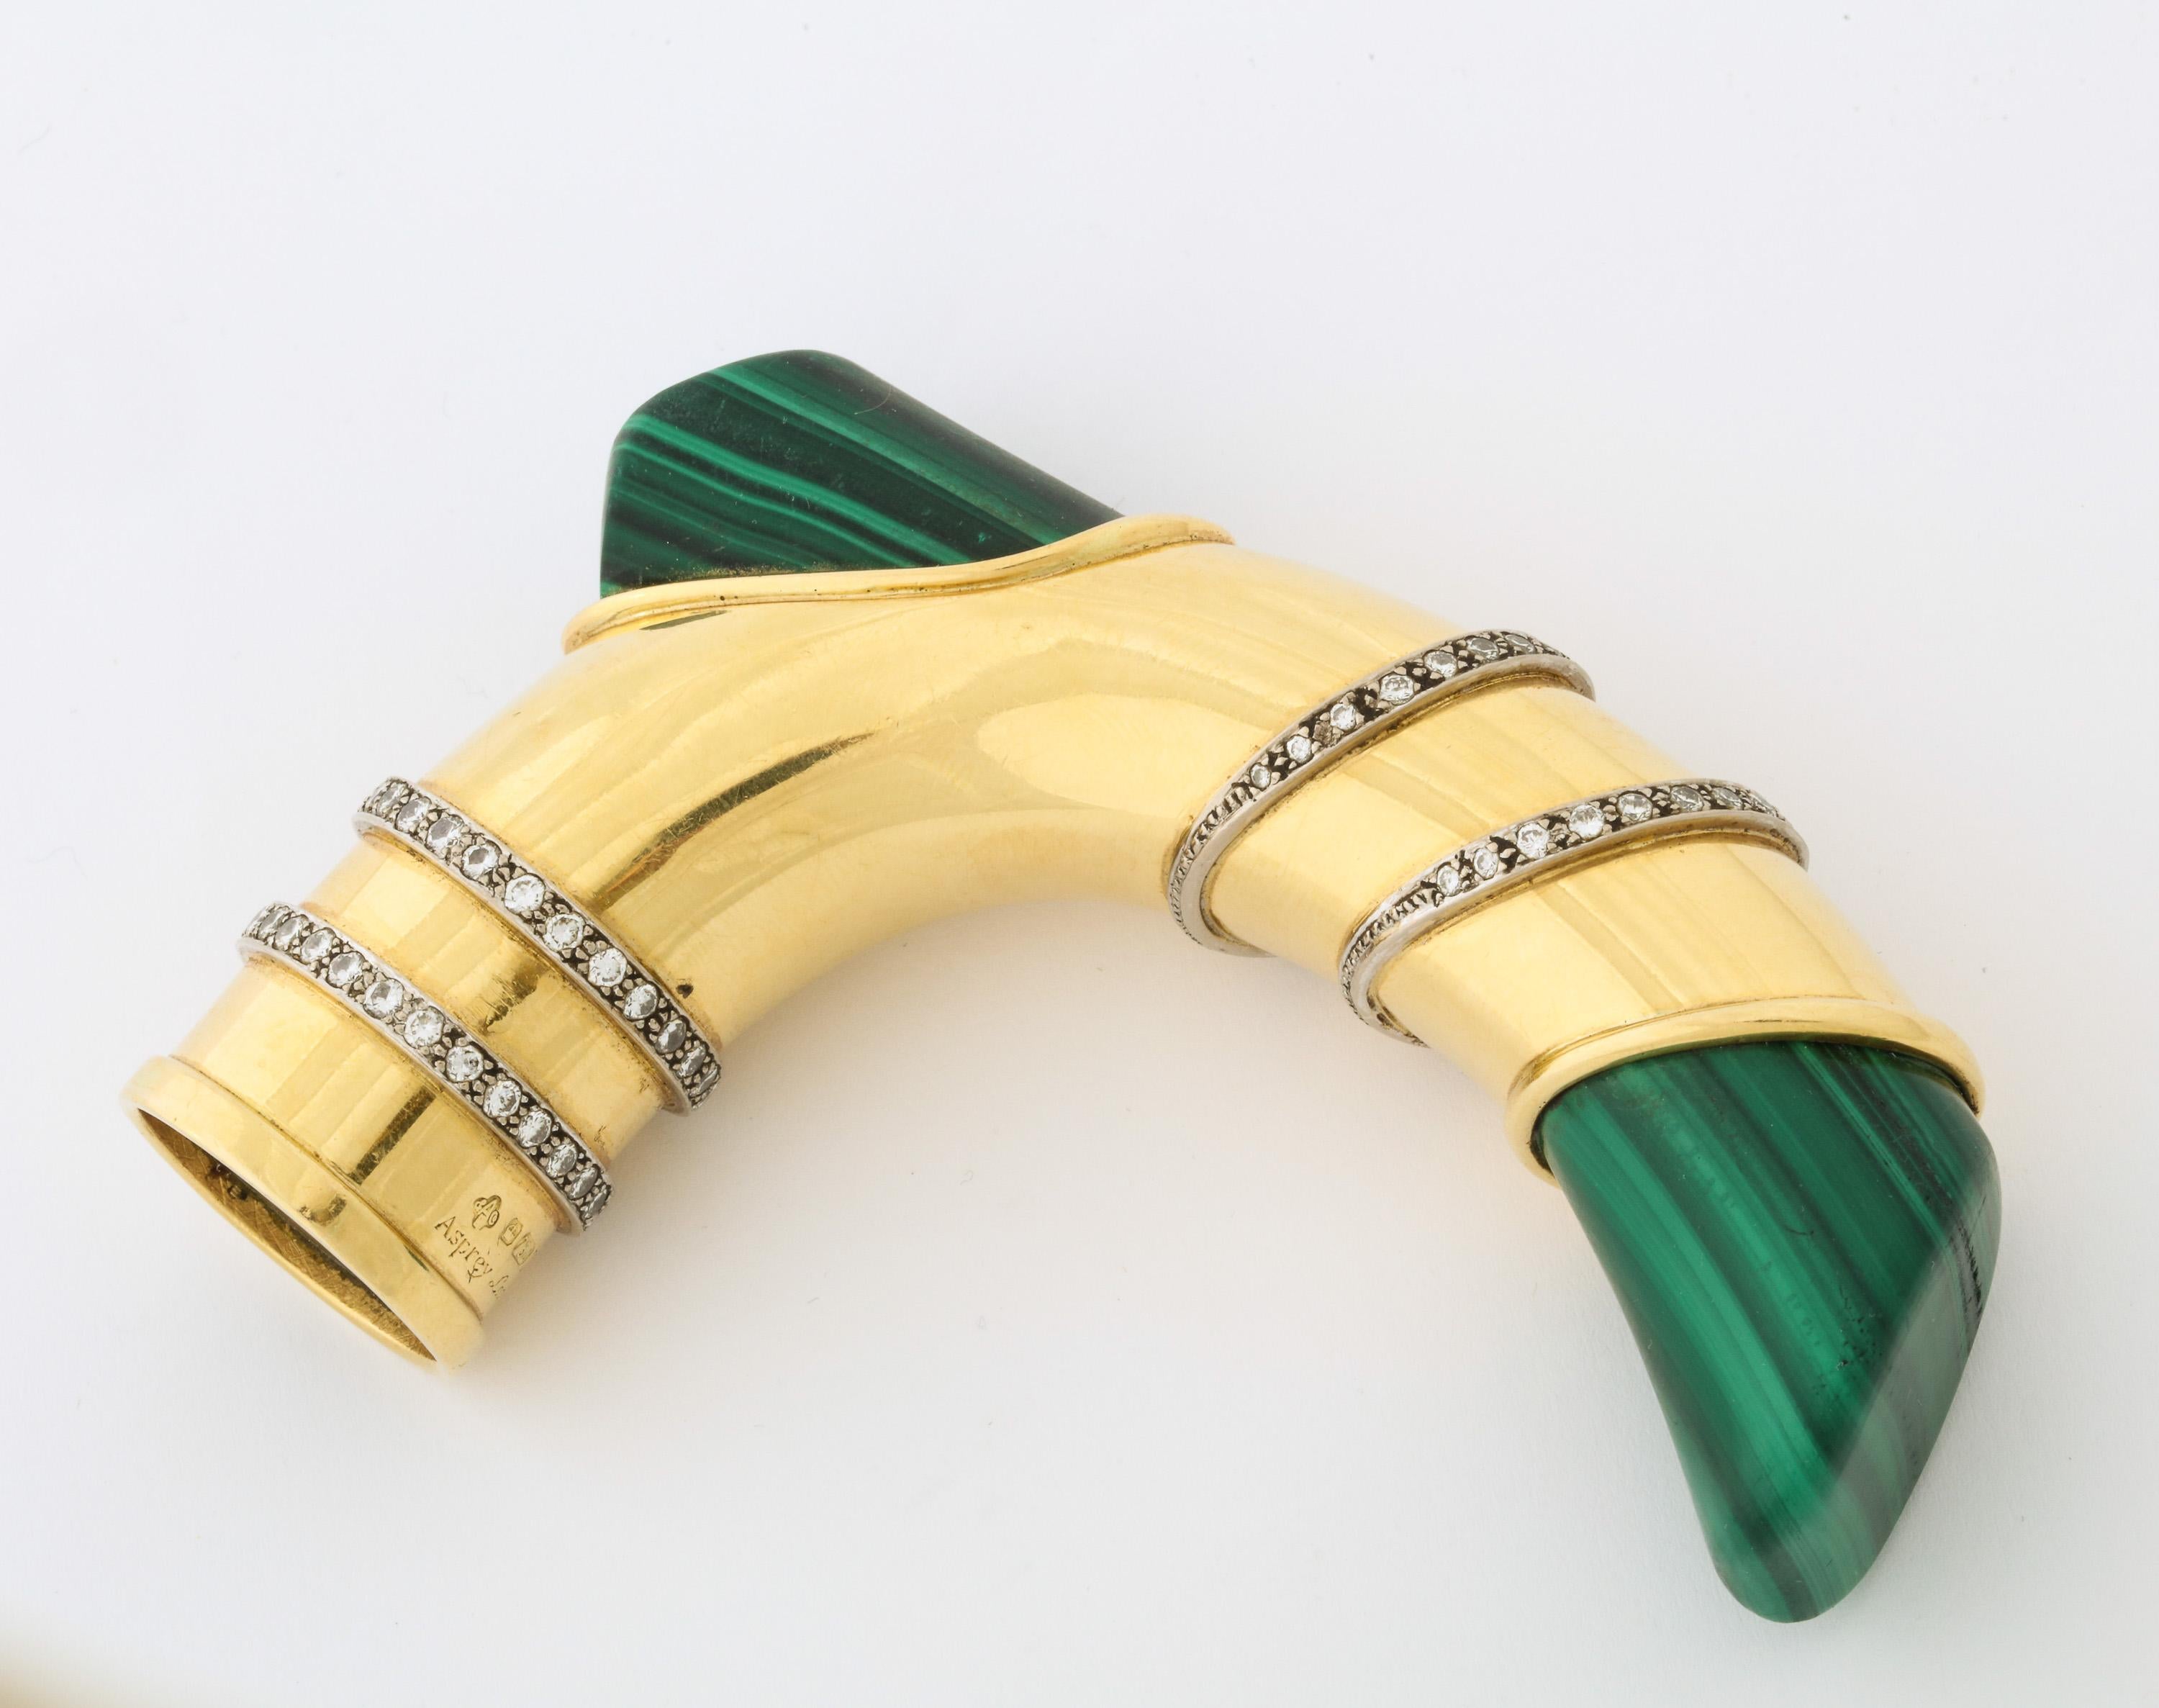 18-Karat gold, diamonds, and malachite cane walking stick handle by Asprey London,
20th century.

Can also be used as a door handle. 

Hallmarked, stamped 750 and signed Asprey London

Measures: 4